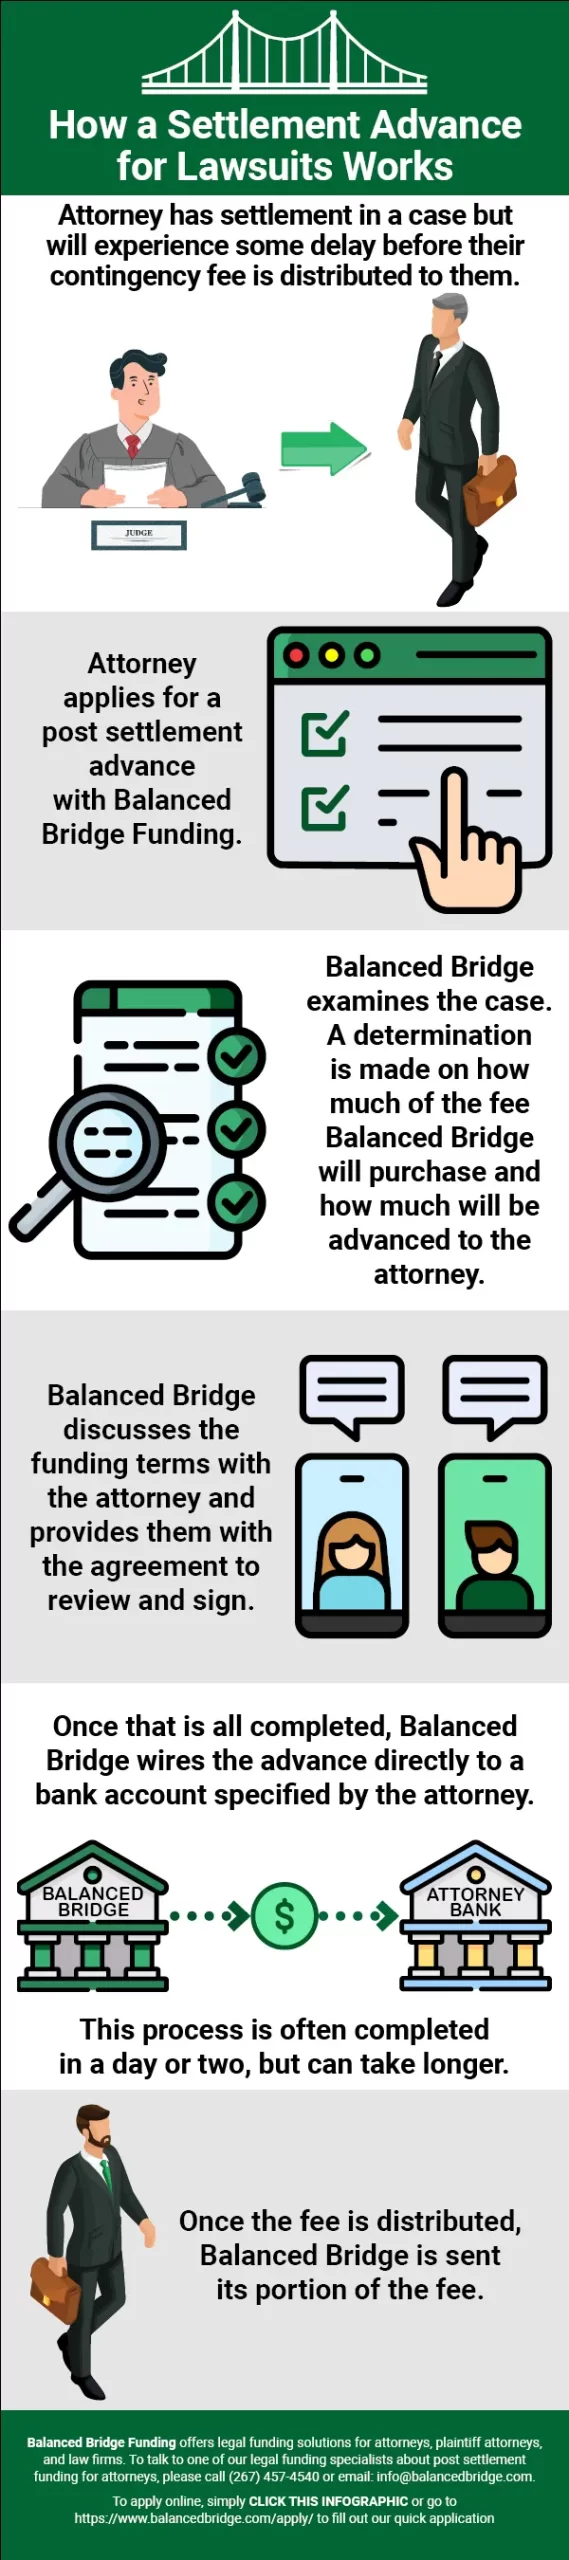 How Settlement Advance for Lawsuits Works Infographic